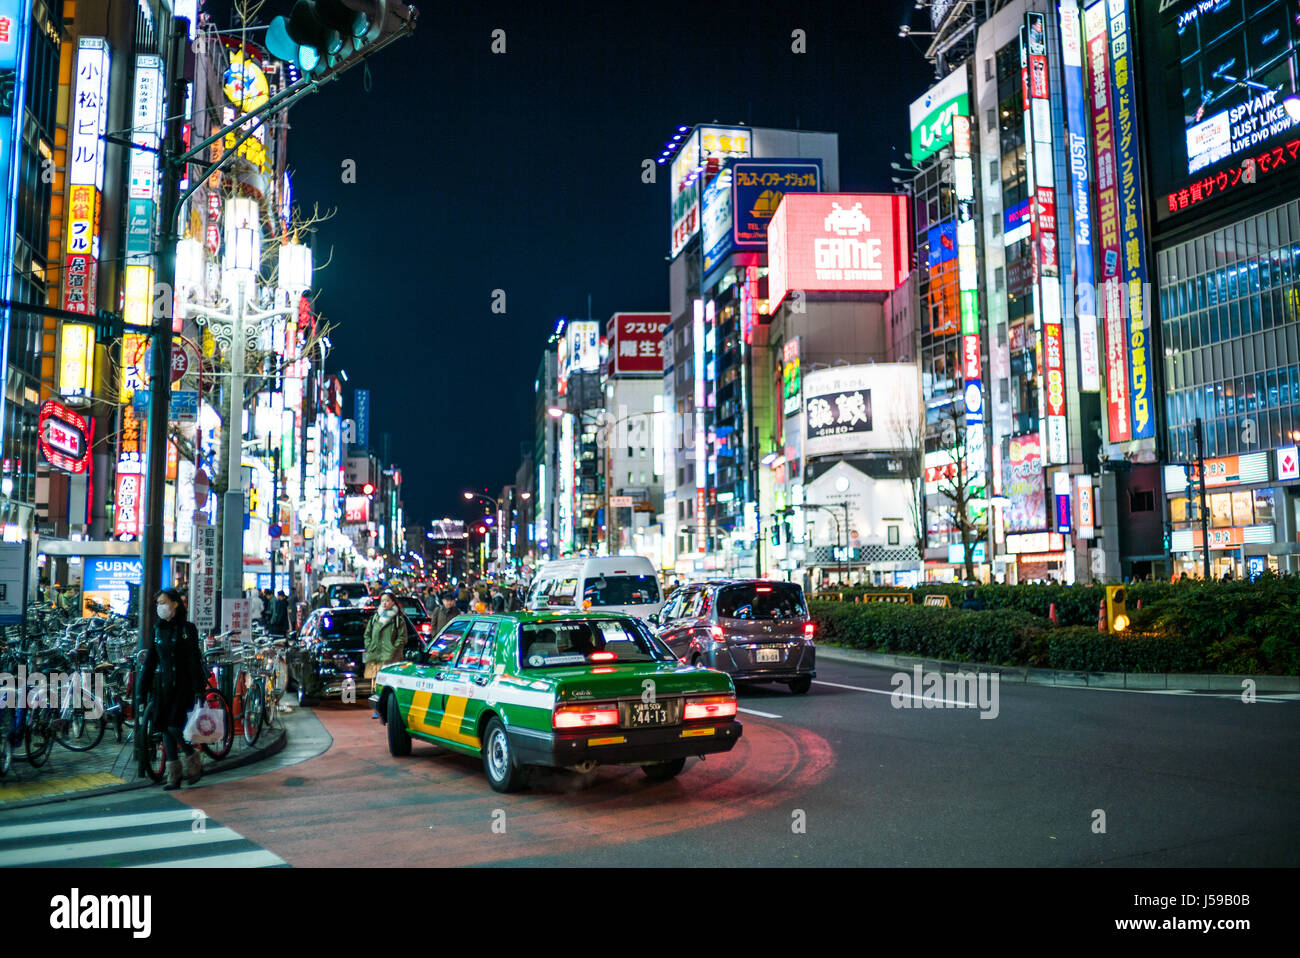 A taxi pulls up to the kerb one night in the vibrantly illuminated district of Akihabara, Tokyo, Japan Stock Photo